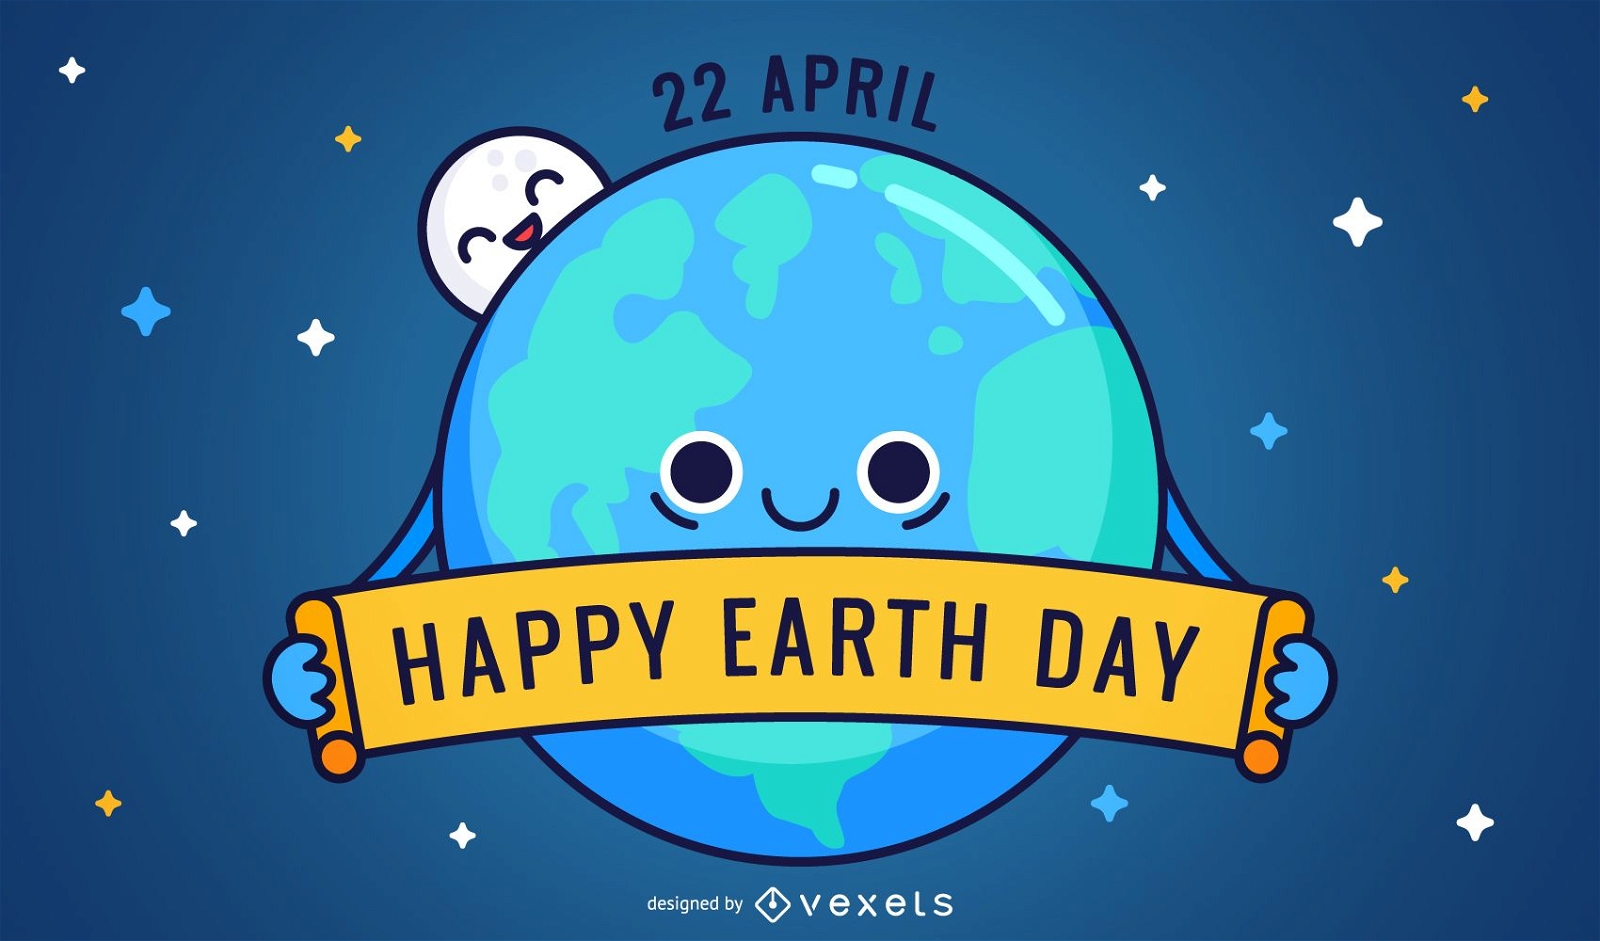 Friednly Happy Earth Day cartoon